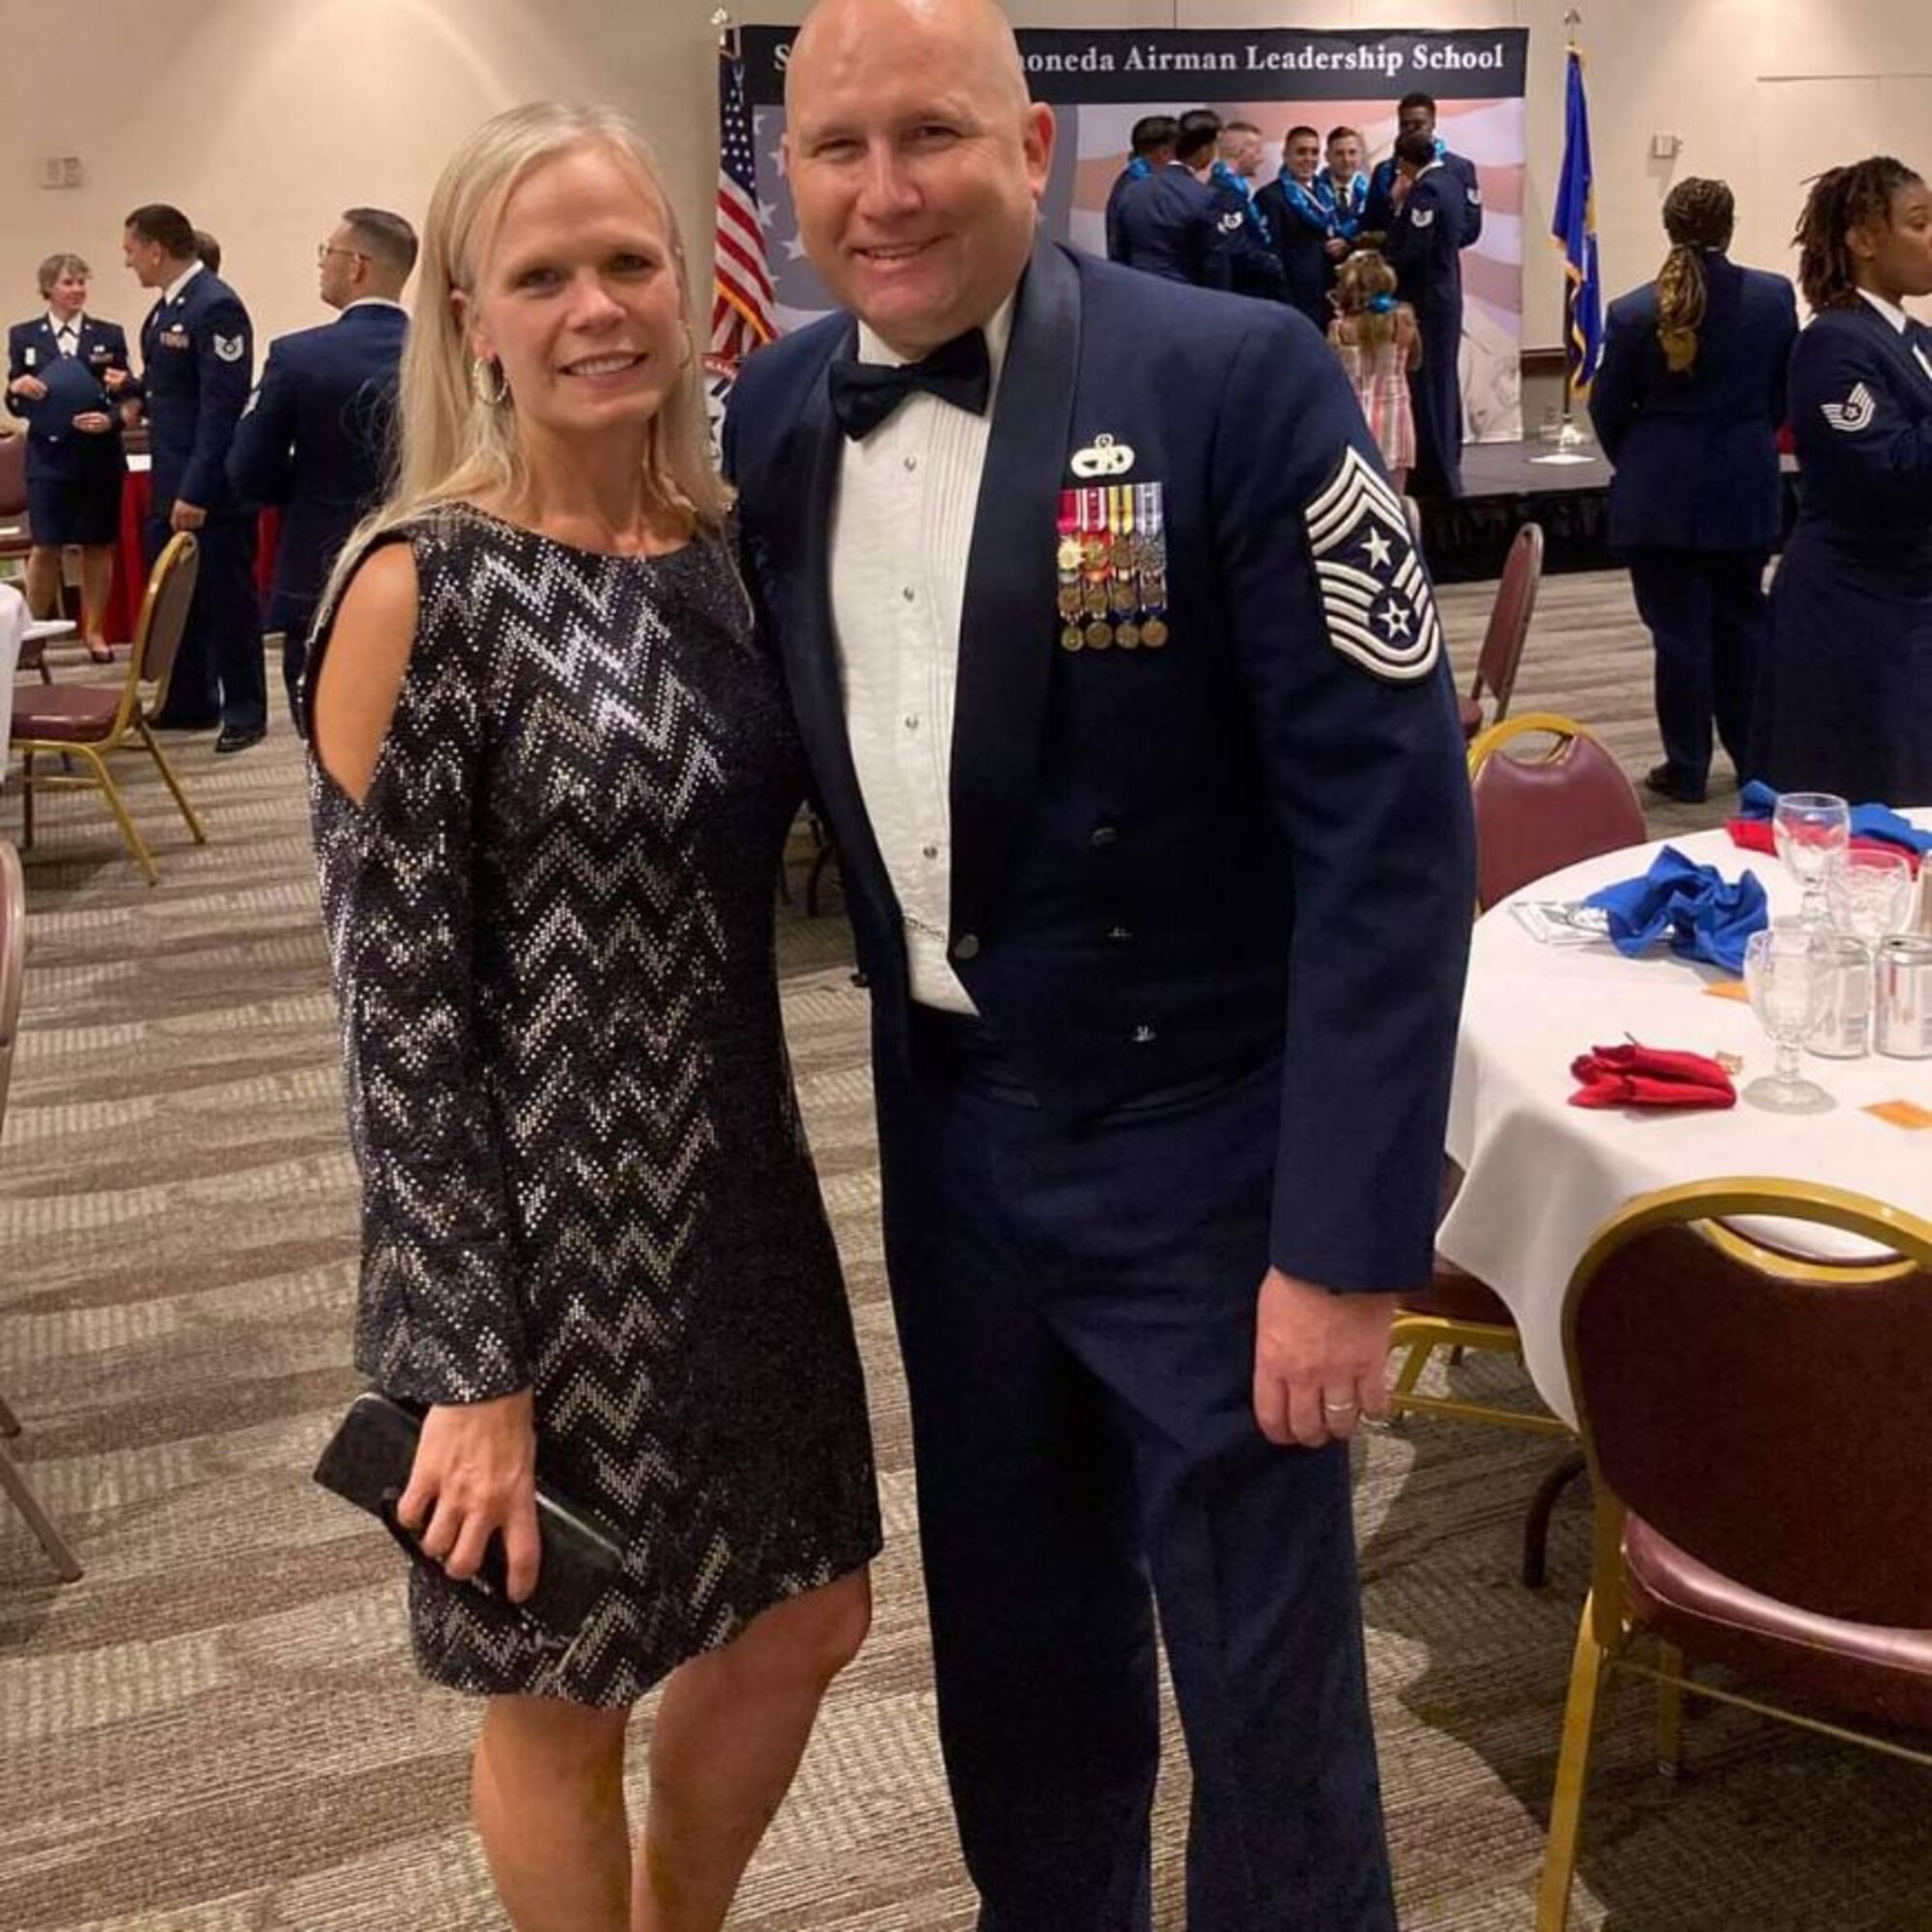 Photos of CMSgt Schultz and his wife